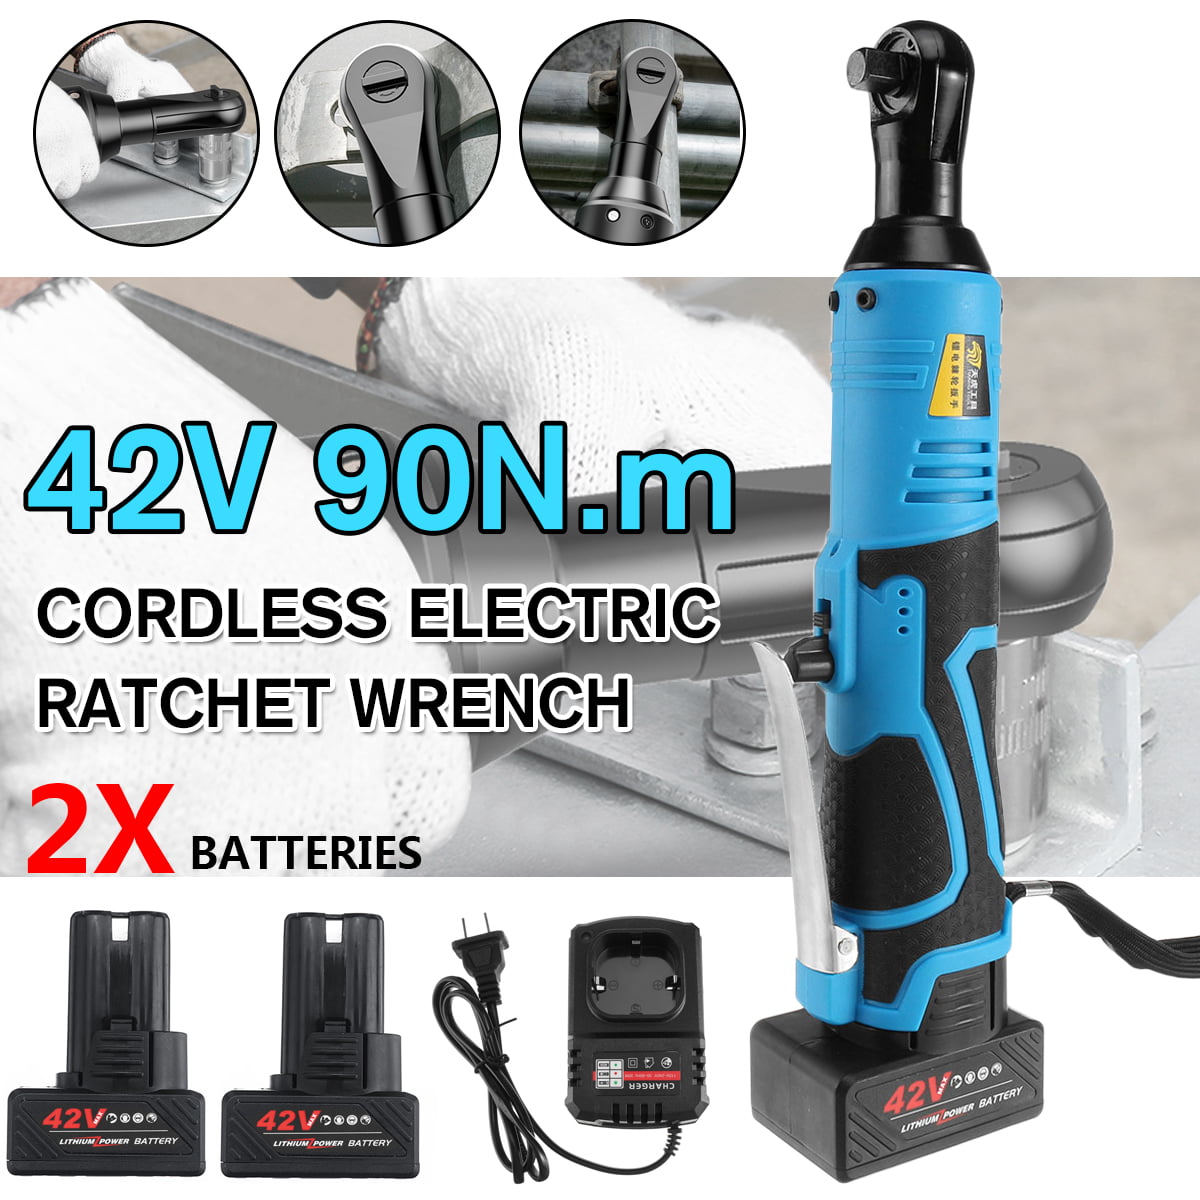 Cordless Electric Ratchet Wrench 12V Battery Charger Kit 3/8 RIGHT ANGLE TOOL 